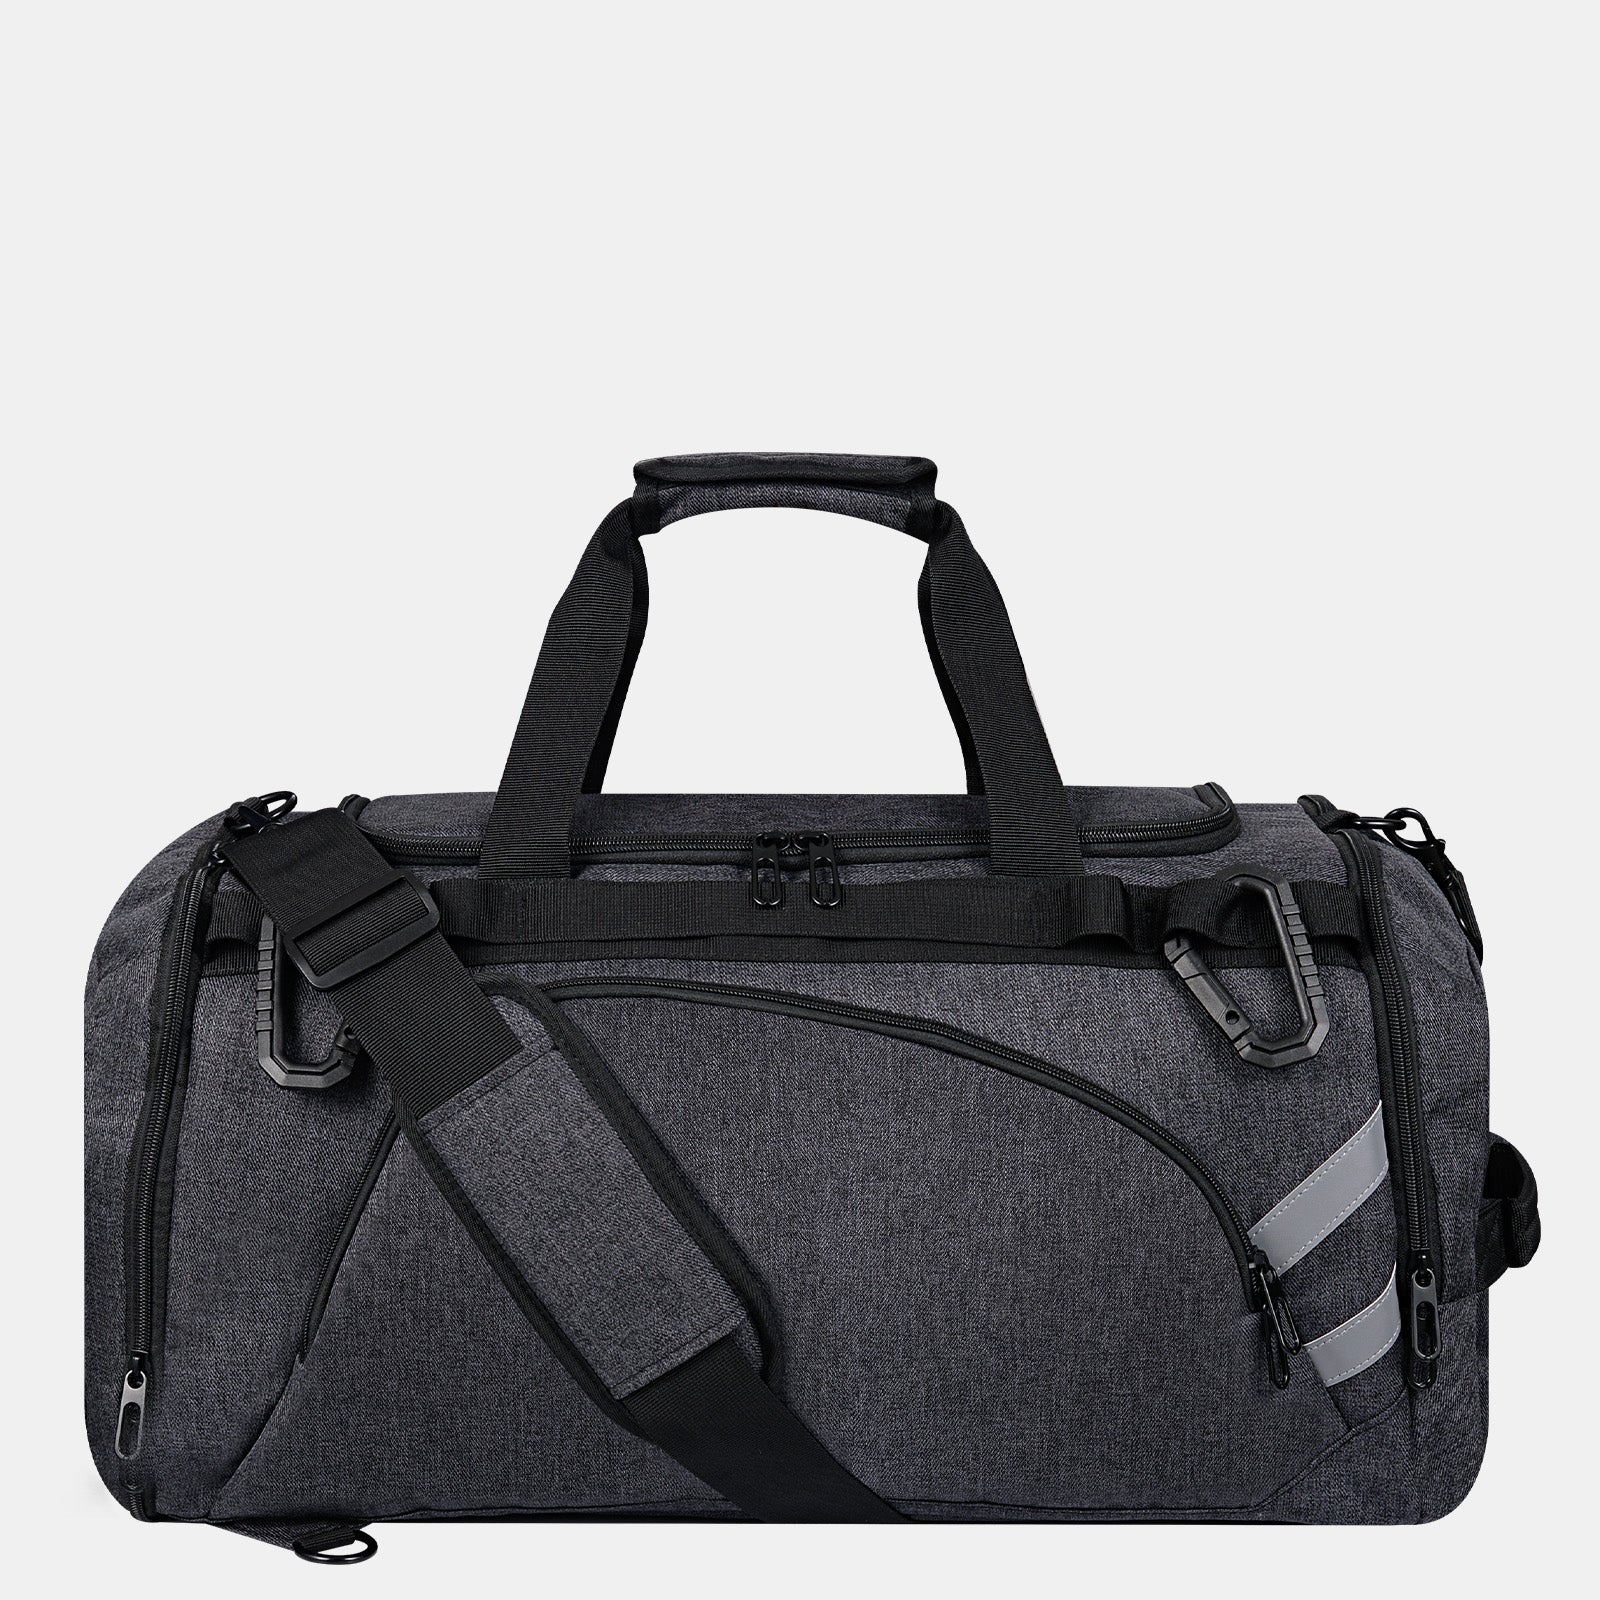 Bertasche Duffel Backpack with Shoe Compartment & Wet Pocket